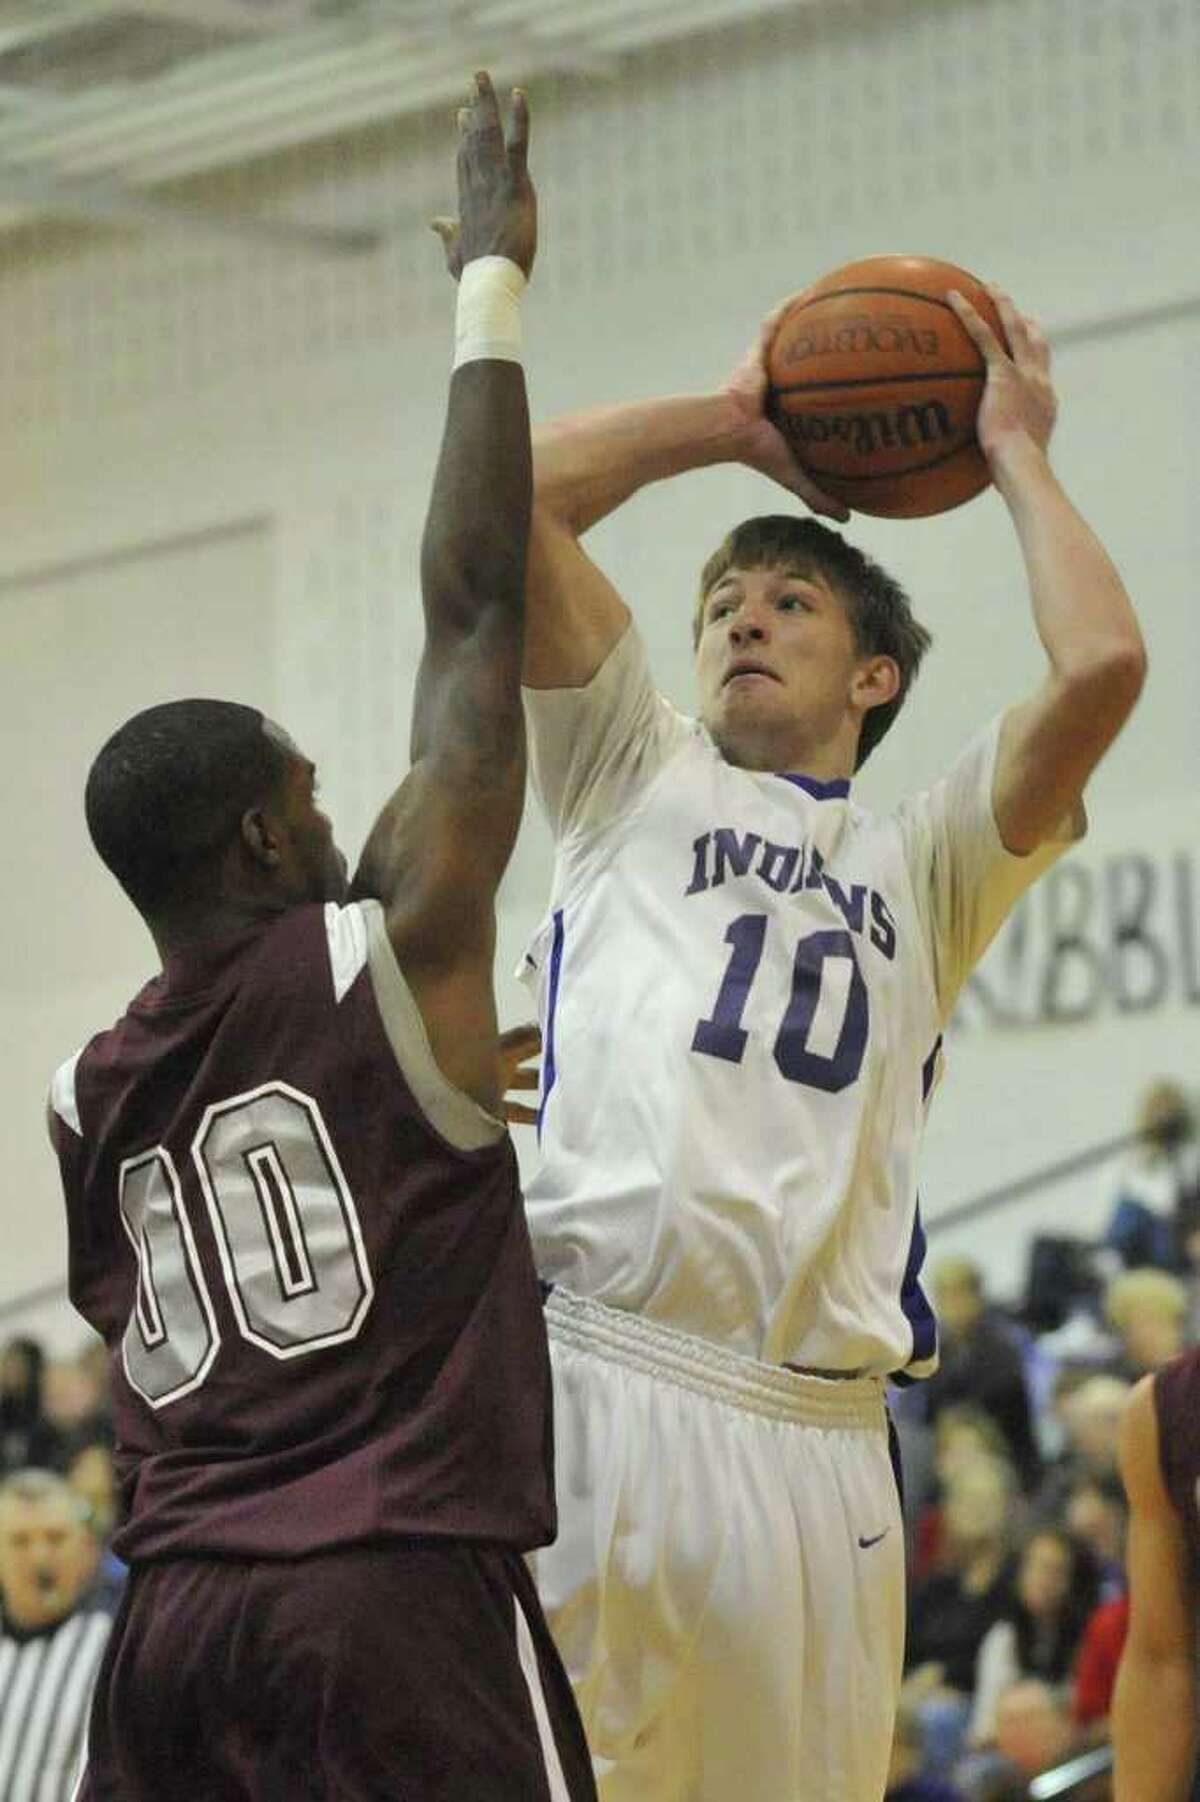 PN-G's Travis Miller shoots against Central's JaKeal Lockett in the first hafl of their District 20-4A game at Port Neches-Groves High School on Friday, January 21, 2011. Valentino Mauricio/The Enterprise